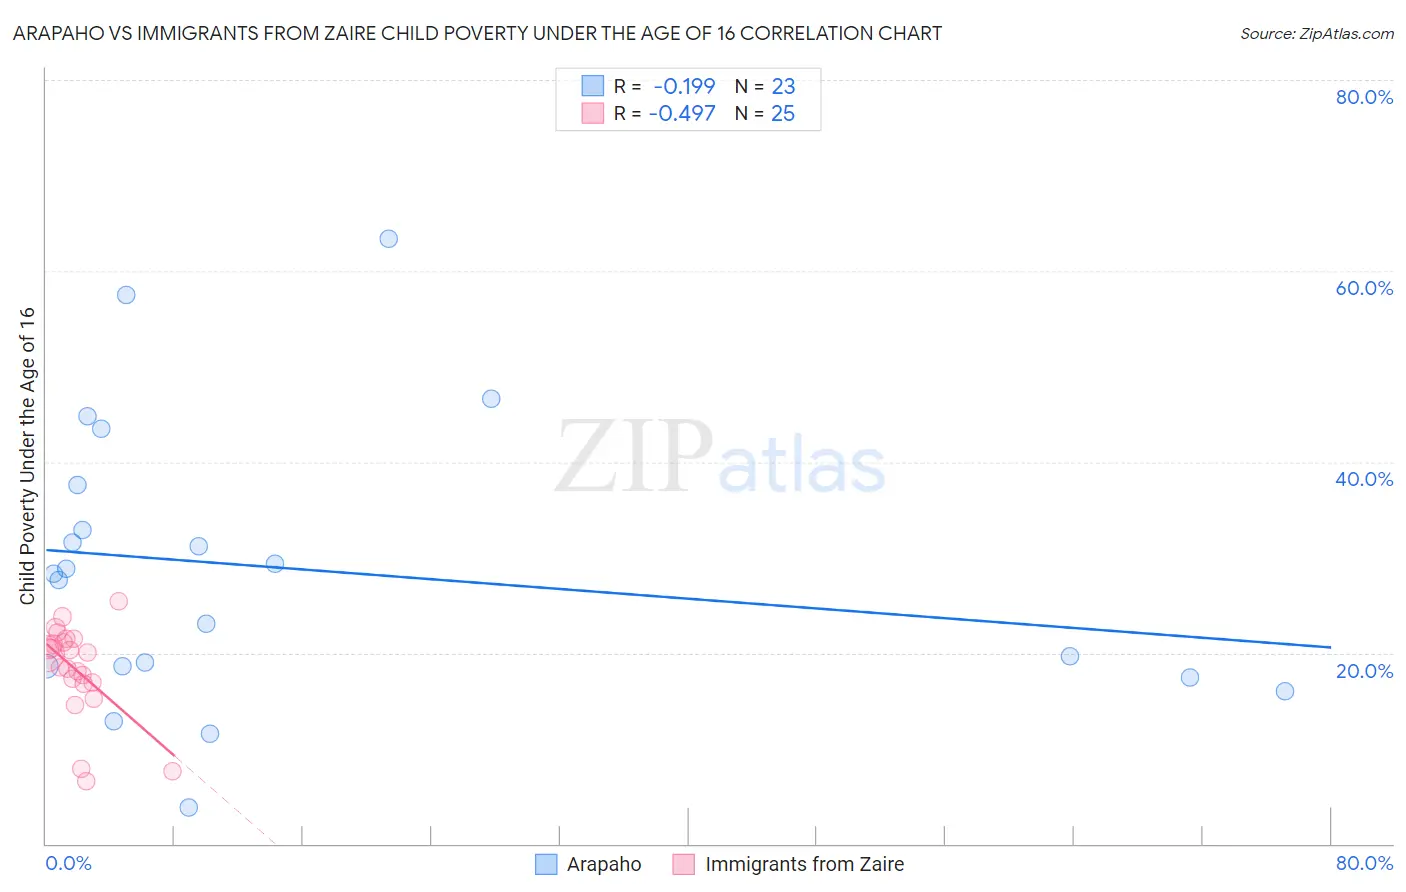 Arapaho vs Immigrants from Zaire Child Poverty Under the Age of 16